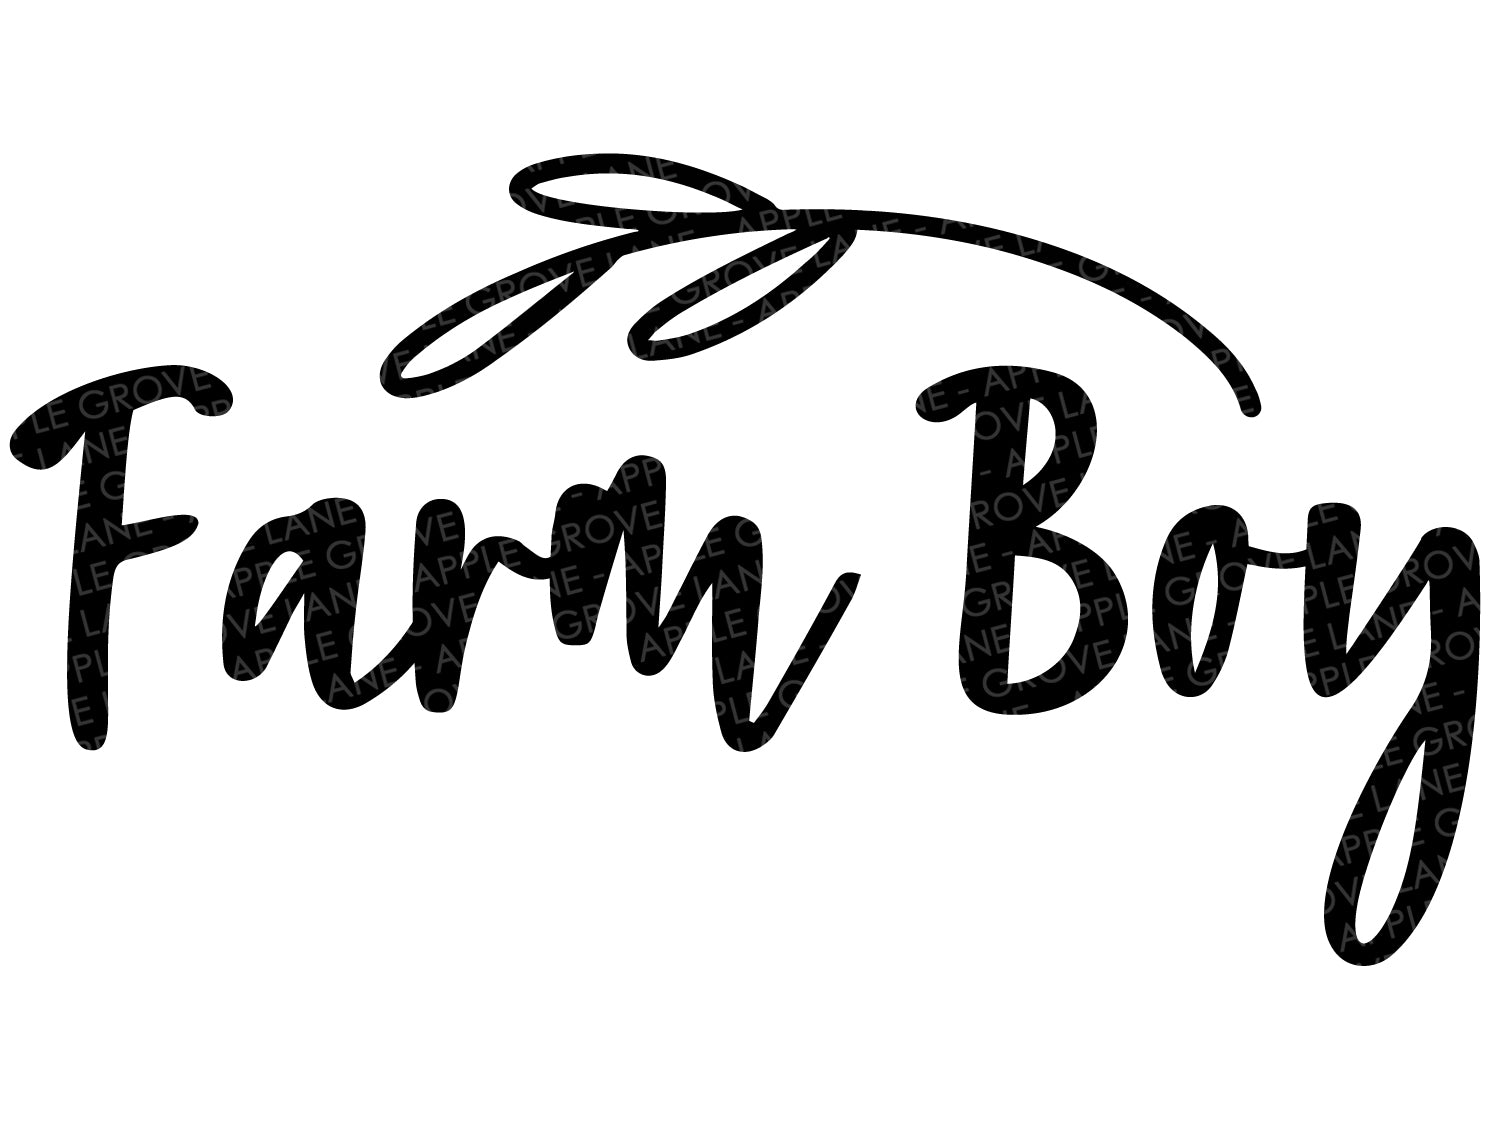 Download Craft Supplies Tools Kits How To Farm Svg Instant Download Farm Boy Svg Farming Svg Printable Vector Clip Art Farming Saying And Quotes Farmhouse Svg Cut Files